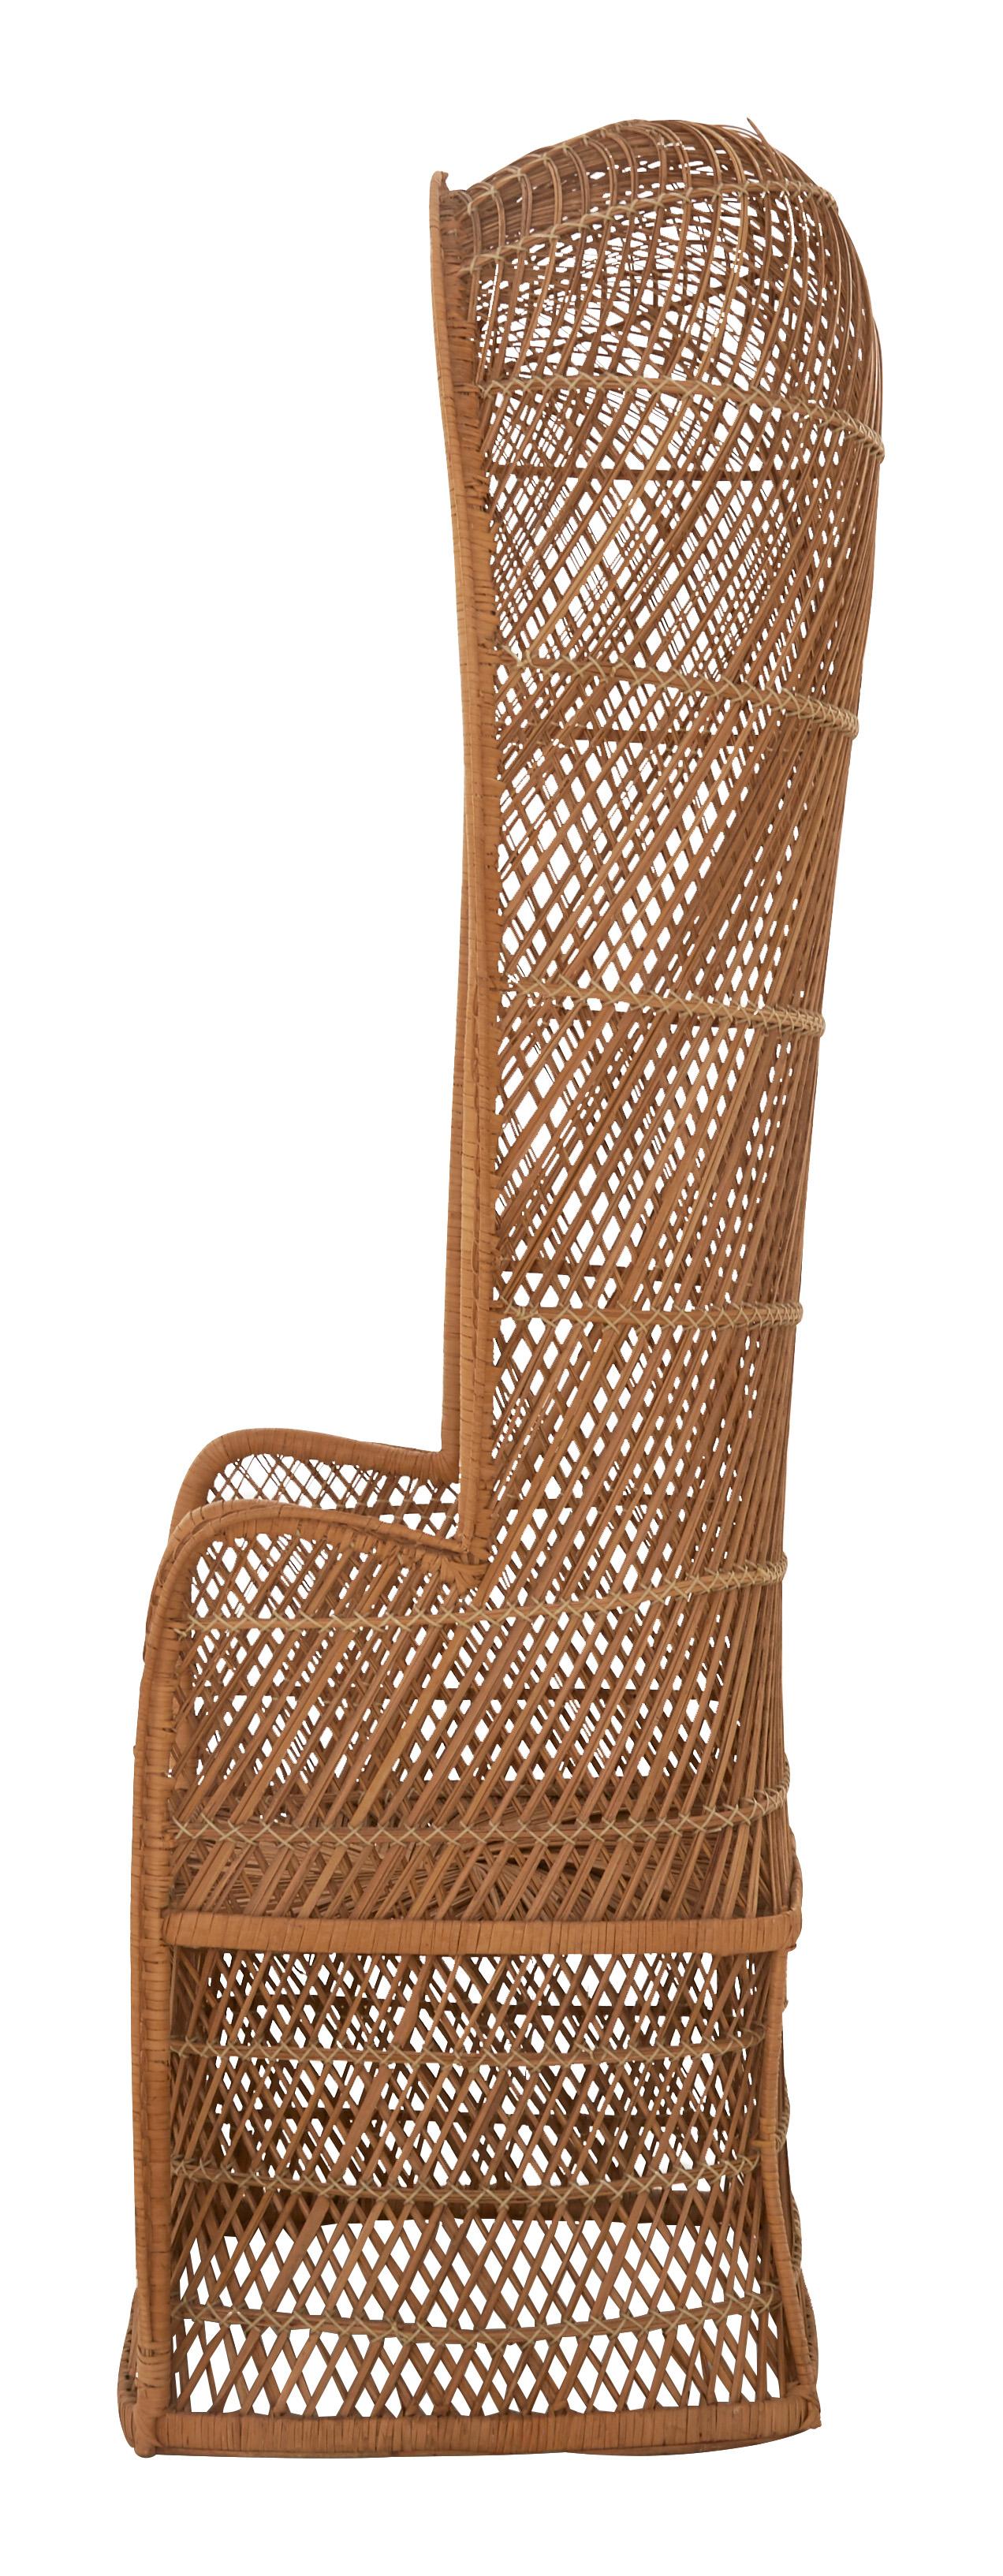 •Hooded, canopy style, weathered rattan chair
•Mid-20th century
•American
•Measures: 25.25